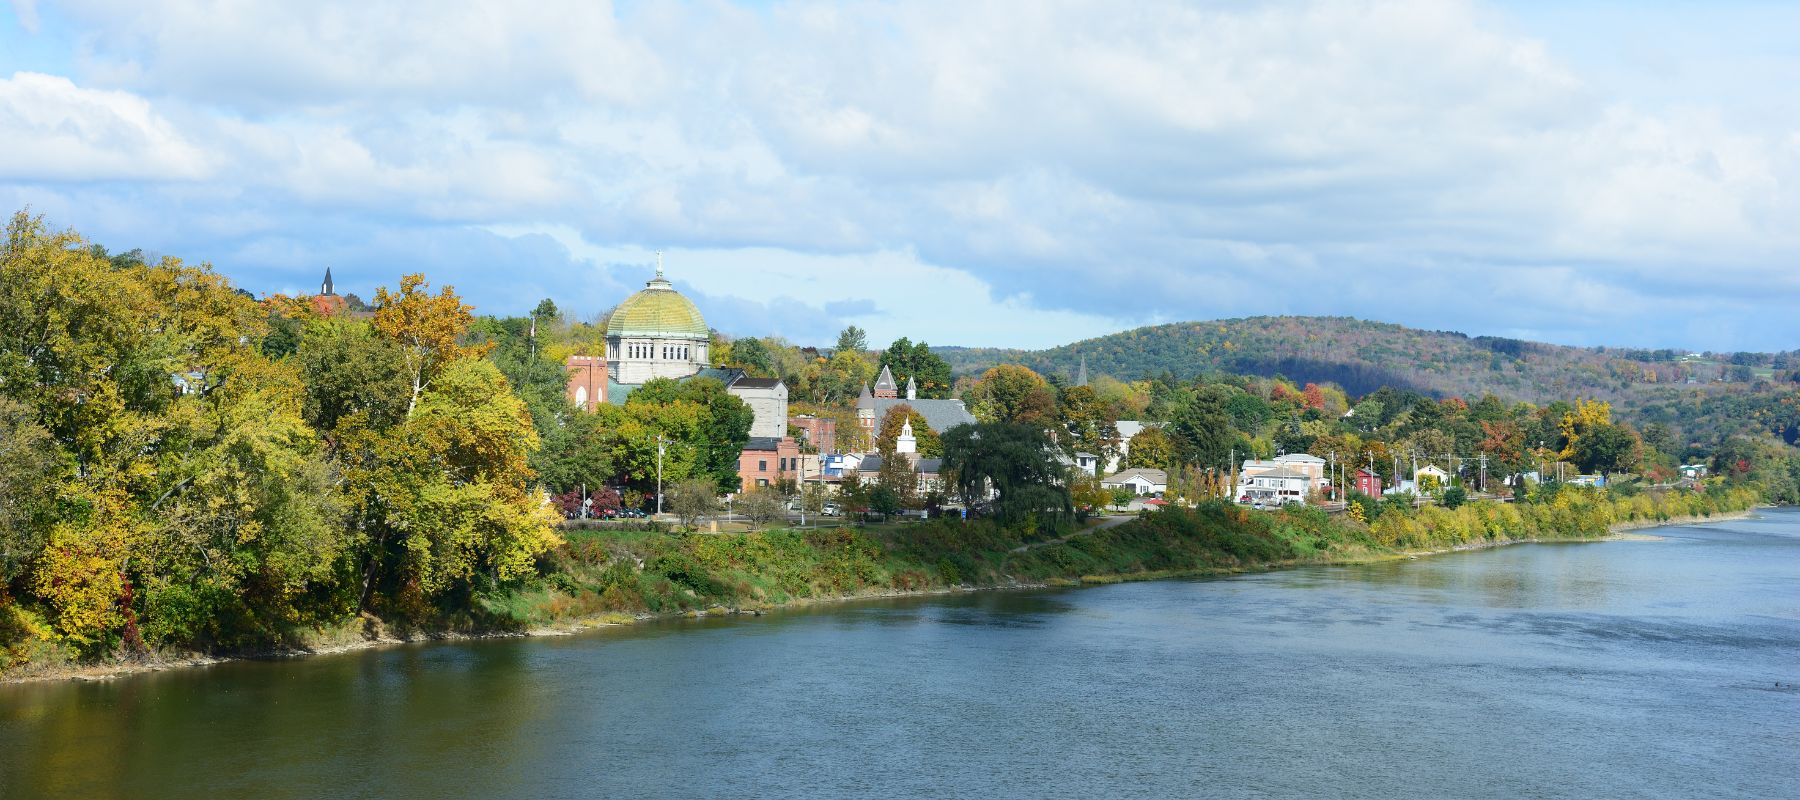 A sweeping view of a picturesque riverside town during fall, with colorful foliage and a grand domed building as the centerpiece. The scene reflects a tranquil, small-town atmosphere with natural beauty and historic architecture